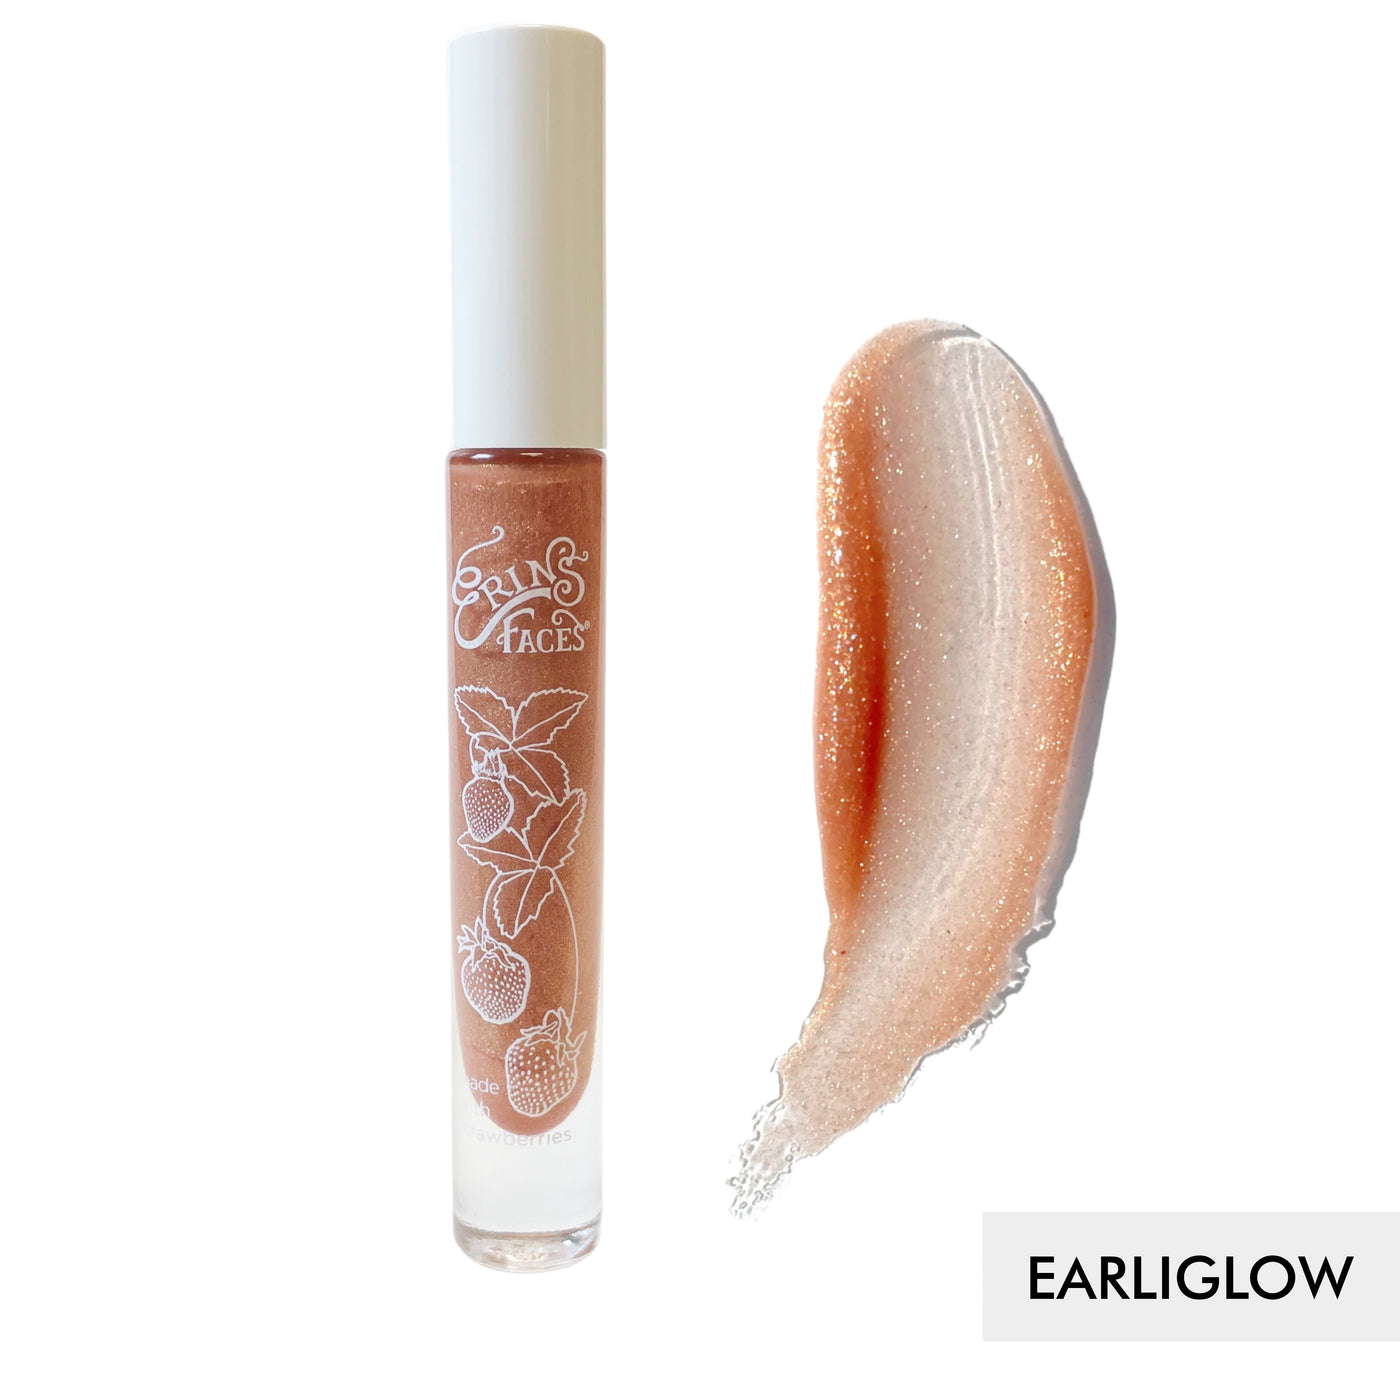 erin's faces fruit smoothie lip gloss bottle and swatch against white background of the shade earliglow